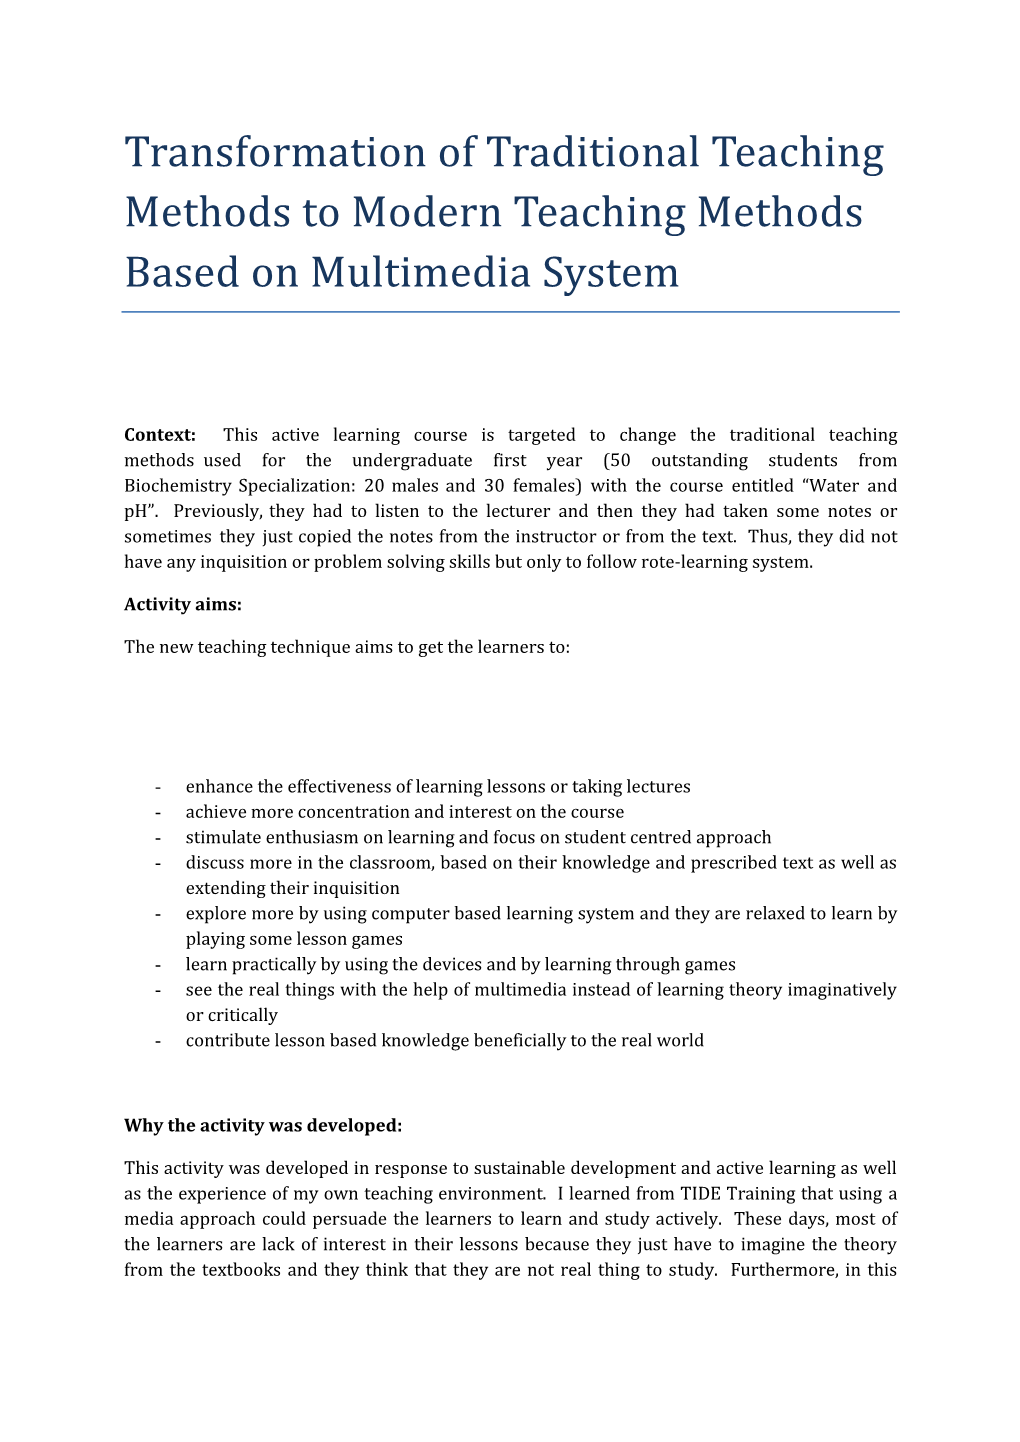 Transformation of Traditional Teaching Methods to Modern Teaching Methods Based on Multimedia System